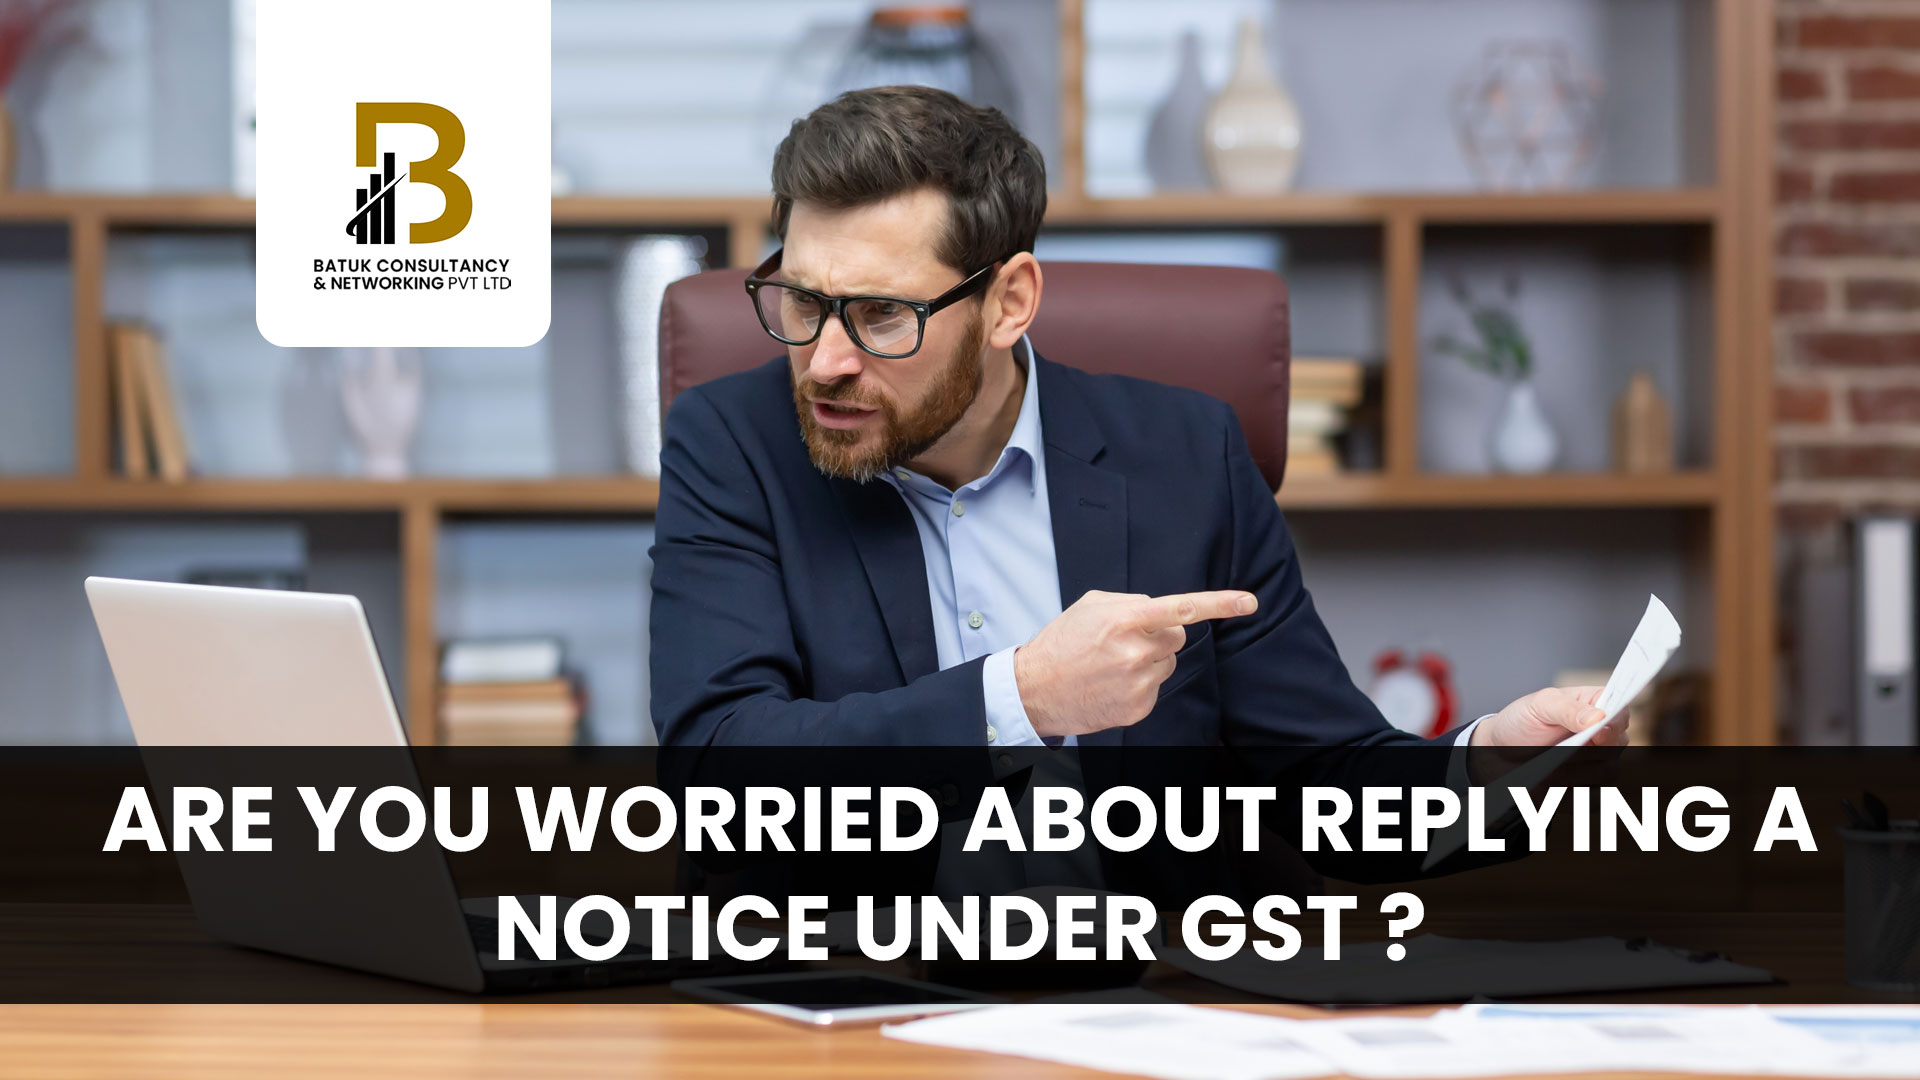 Are you worried about replying a notice under GST